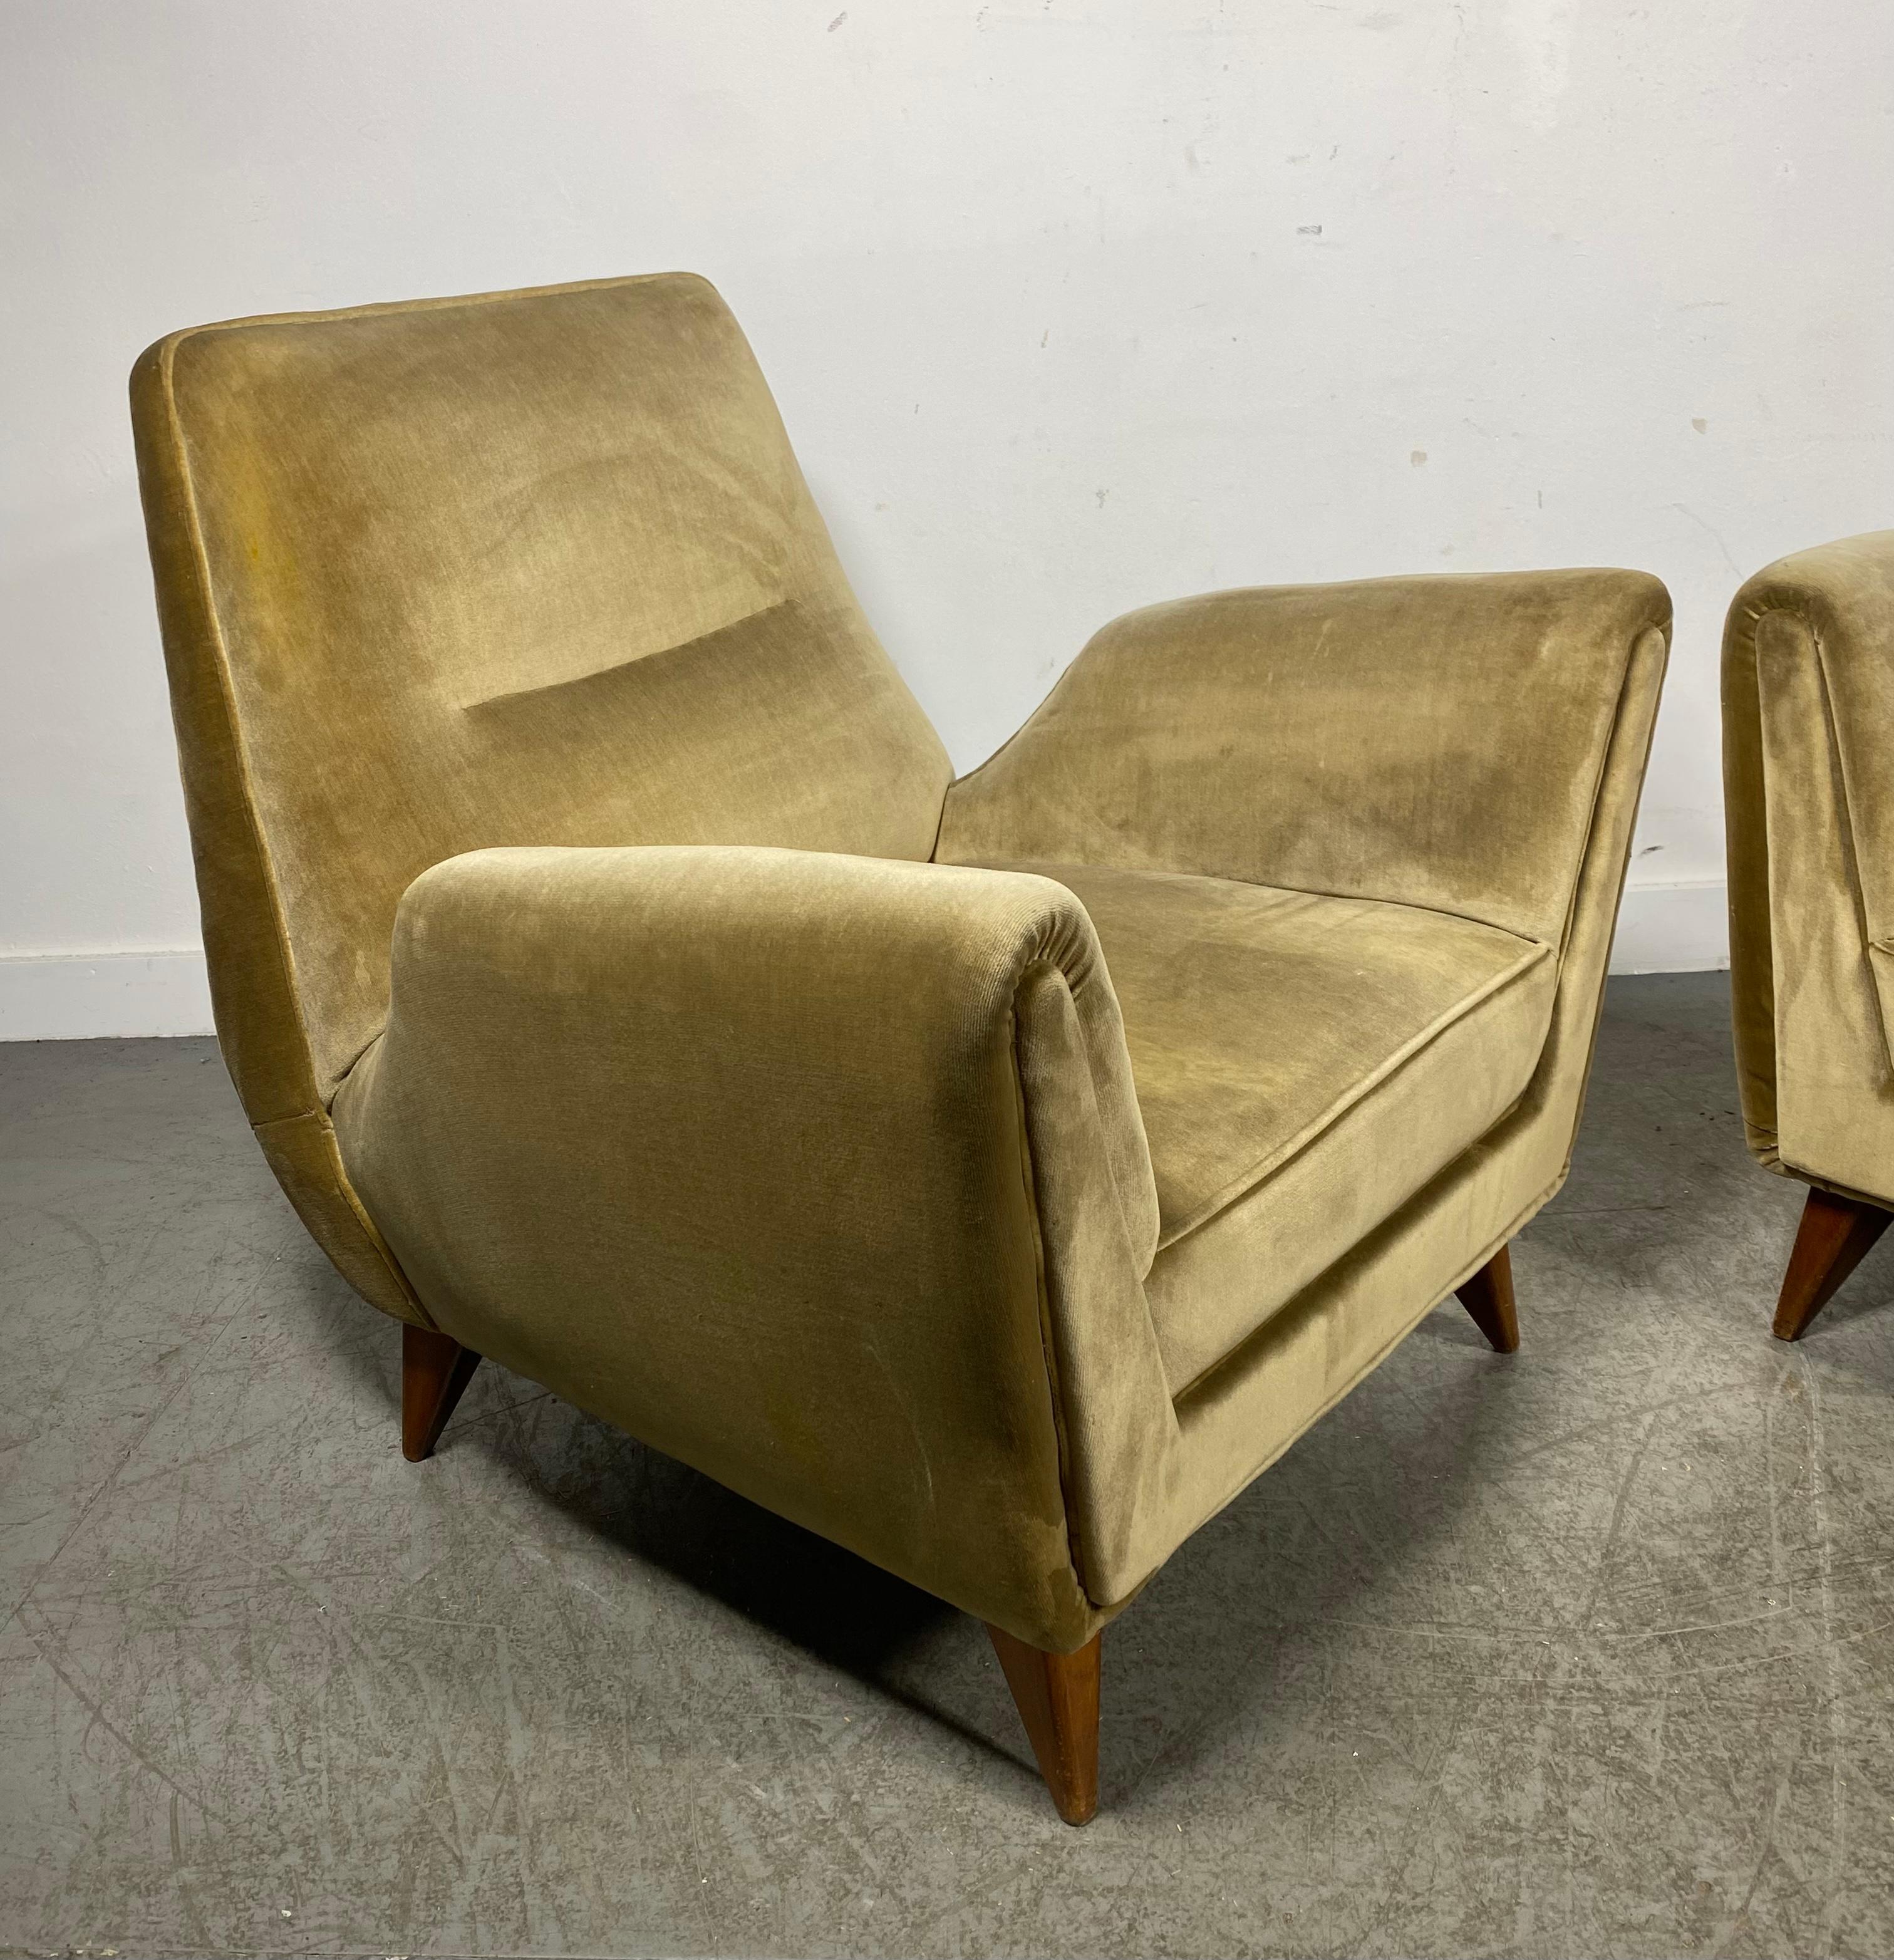 An Elegant and Timeless Pair of Italian Mid-Century Modern Lounge Chairs / Armchairs or Bed-side Chairs attributed to Gio Ponti and by ISA Bergamo. The chairs show a strong resemblance to other chairs that Gio Ponti designed for ISA Bergamo circa